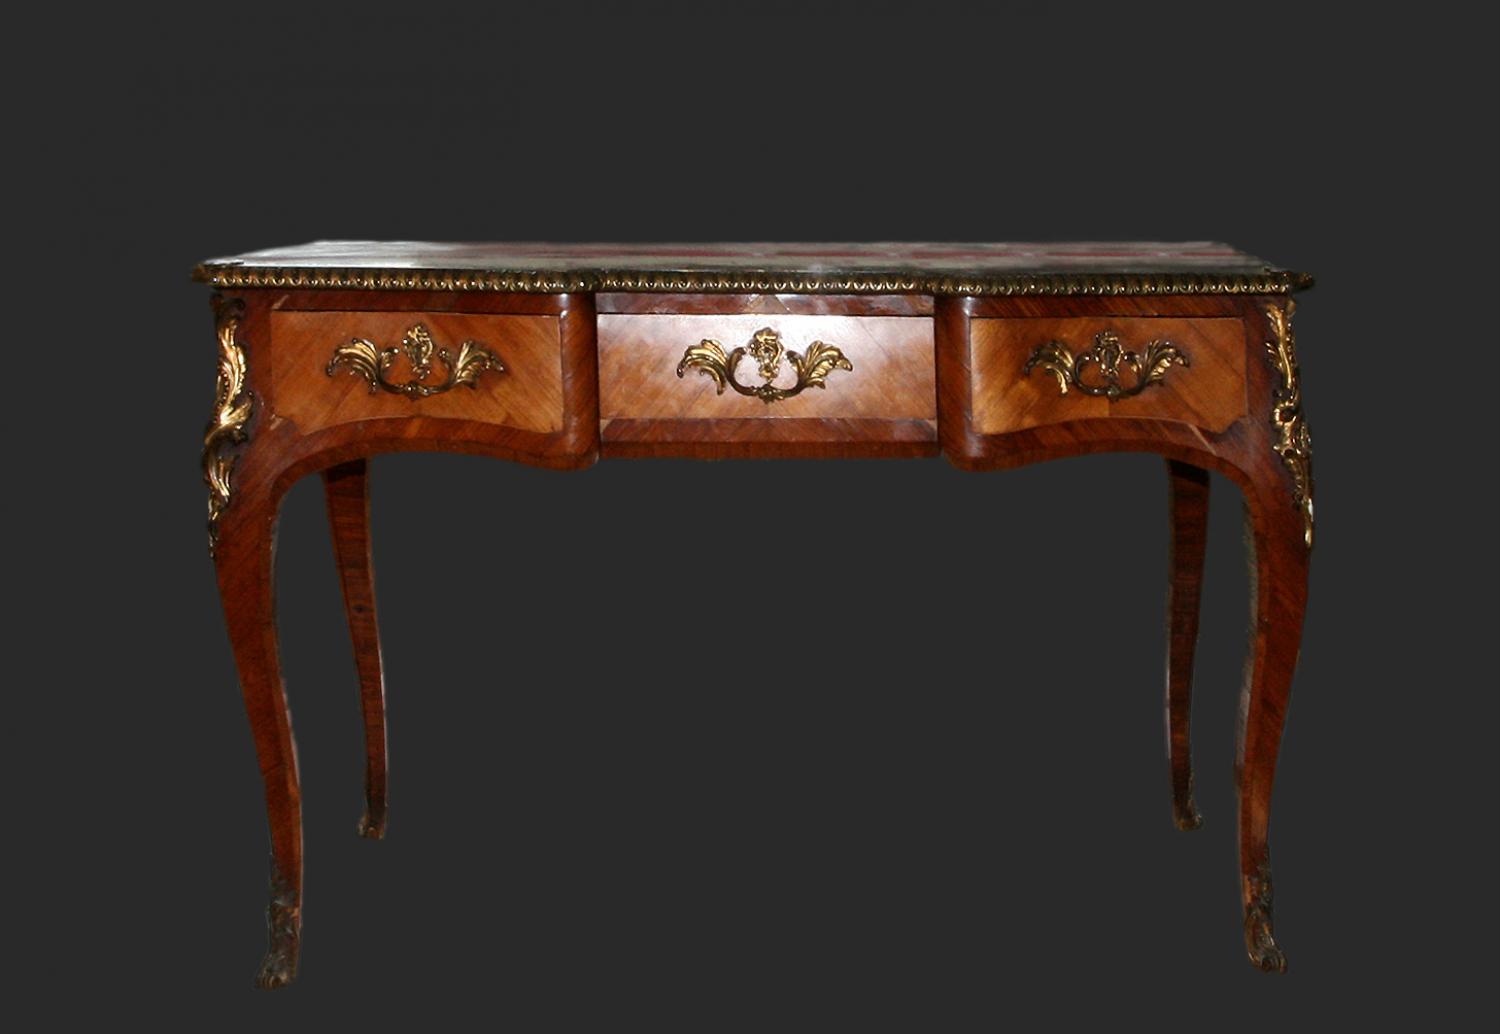 An exceptional quality Louis XVI style desk